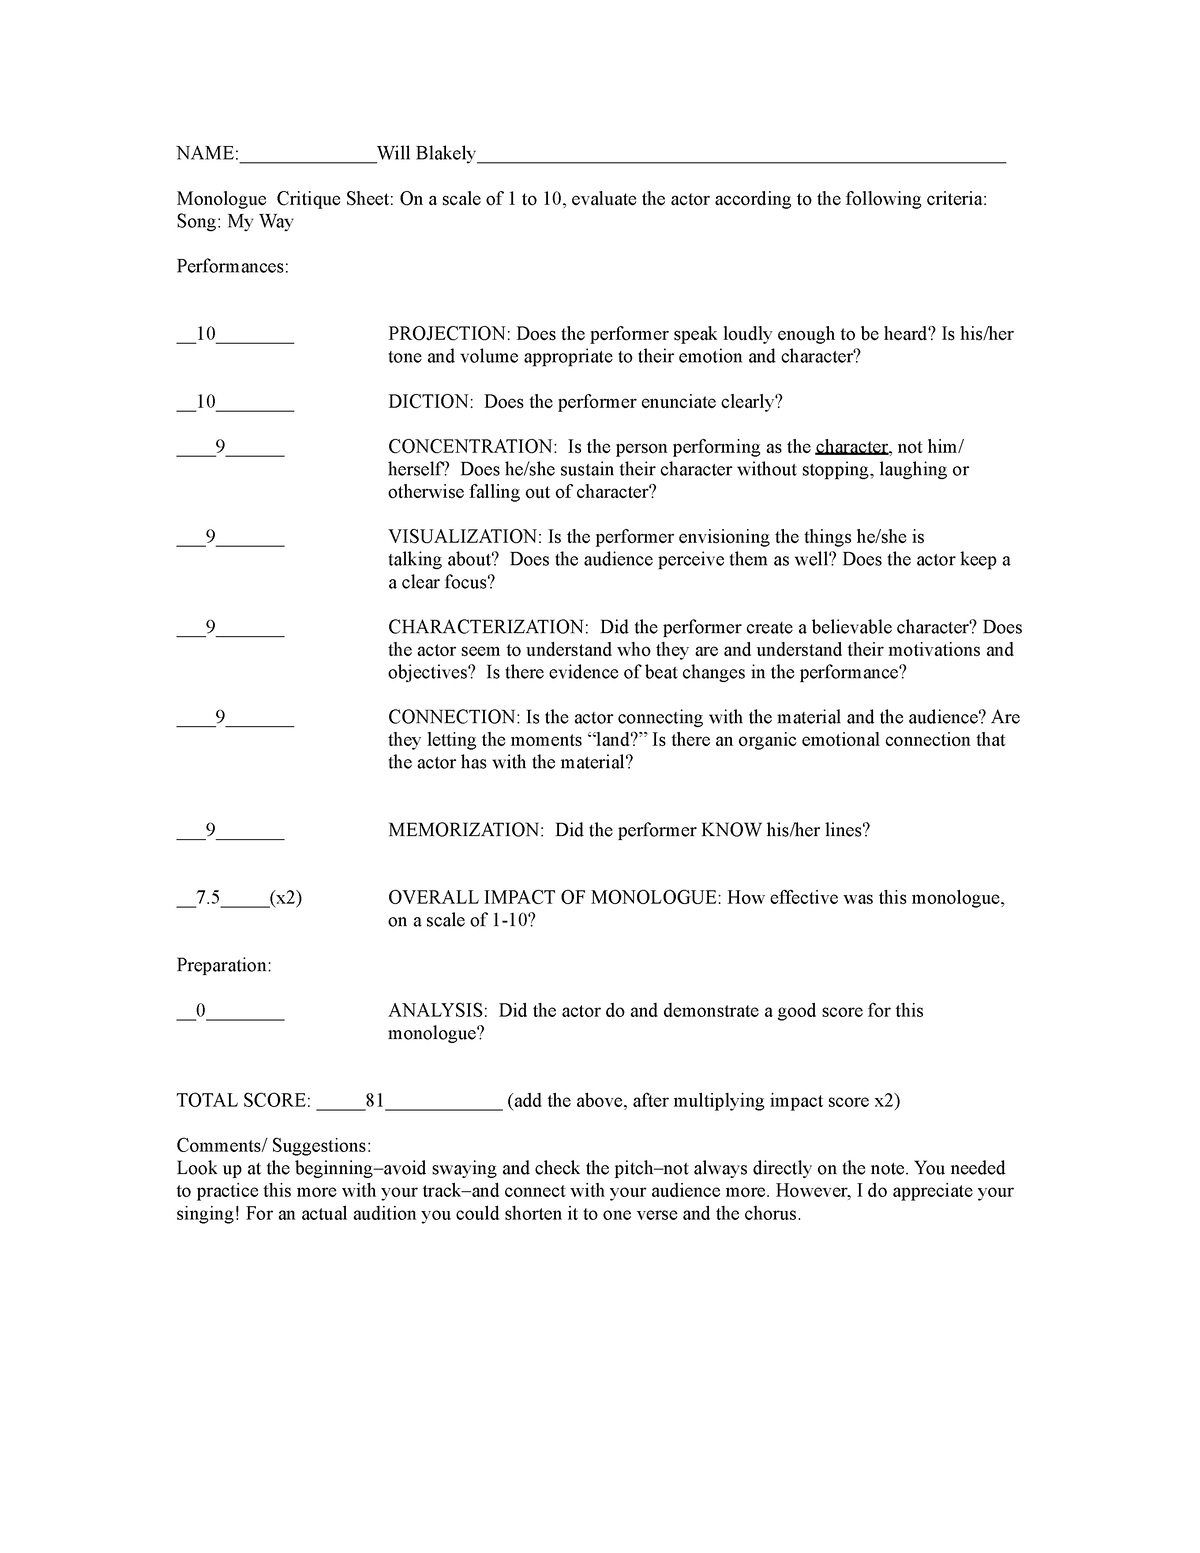 Will Blakely Monologue Critique Sheet - NAME:Will Blakely